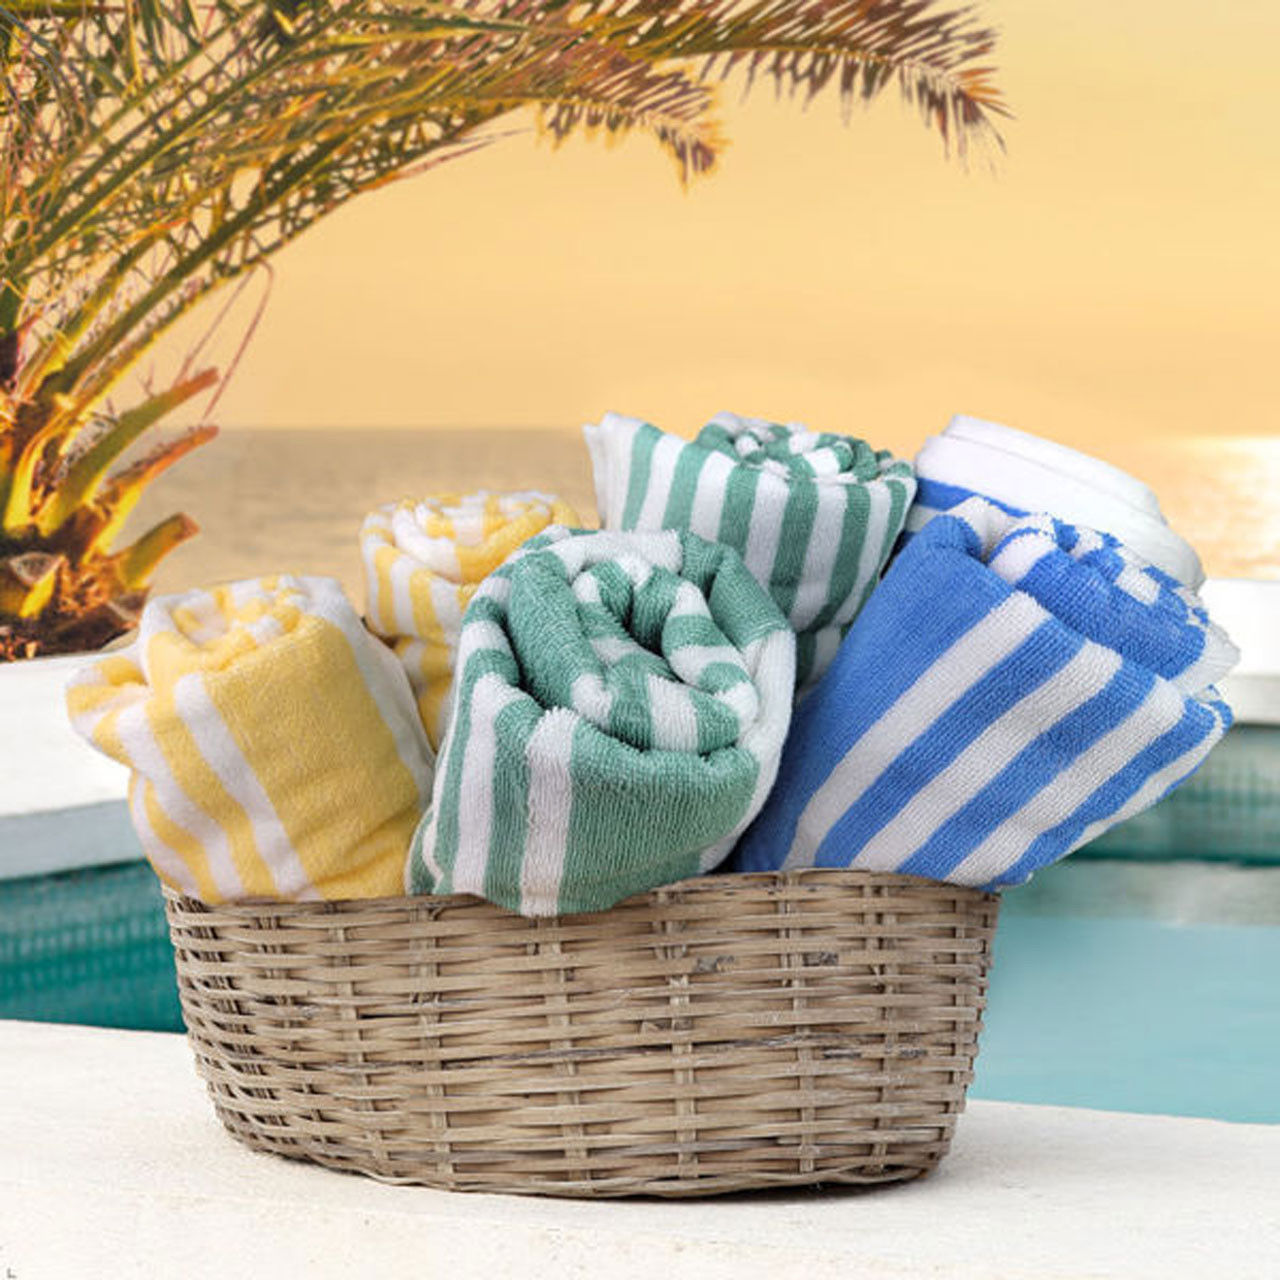 What makes the Playa Cabana Stripe Bulk Beach Towels a must-have for beachgoers?